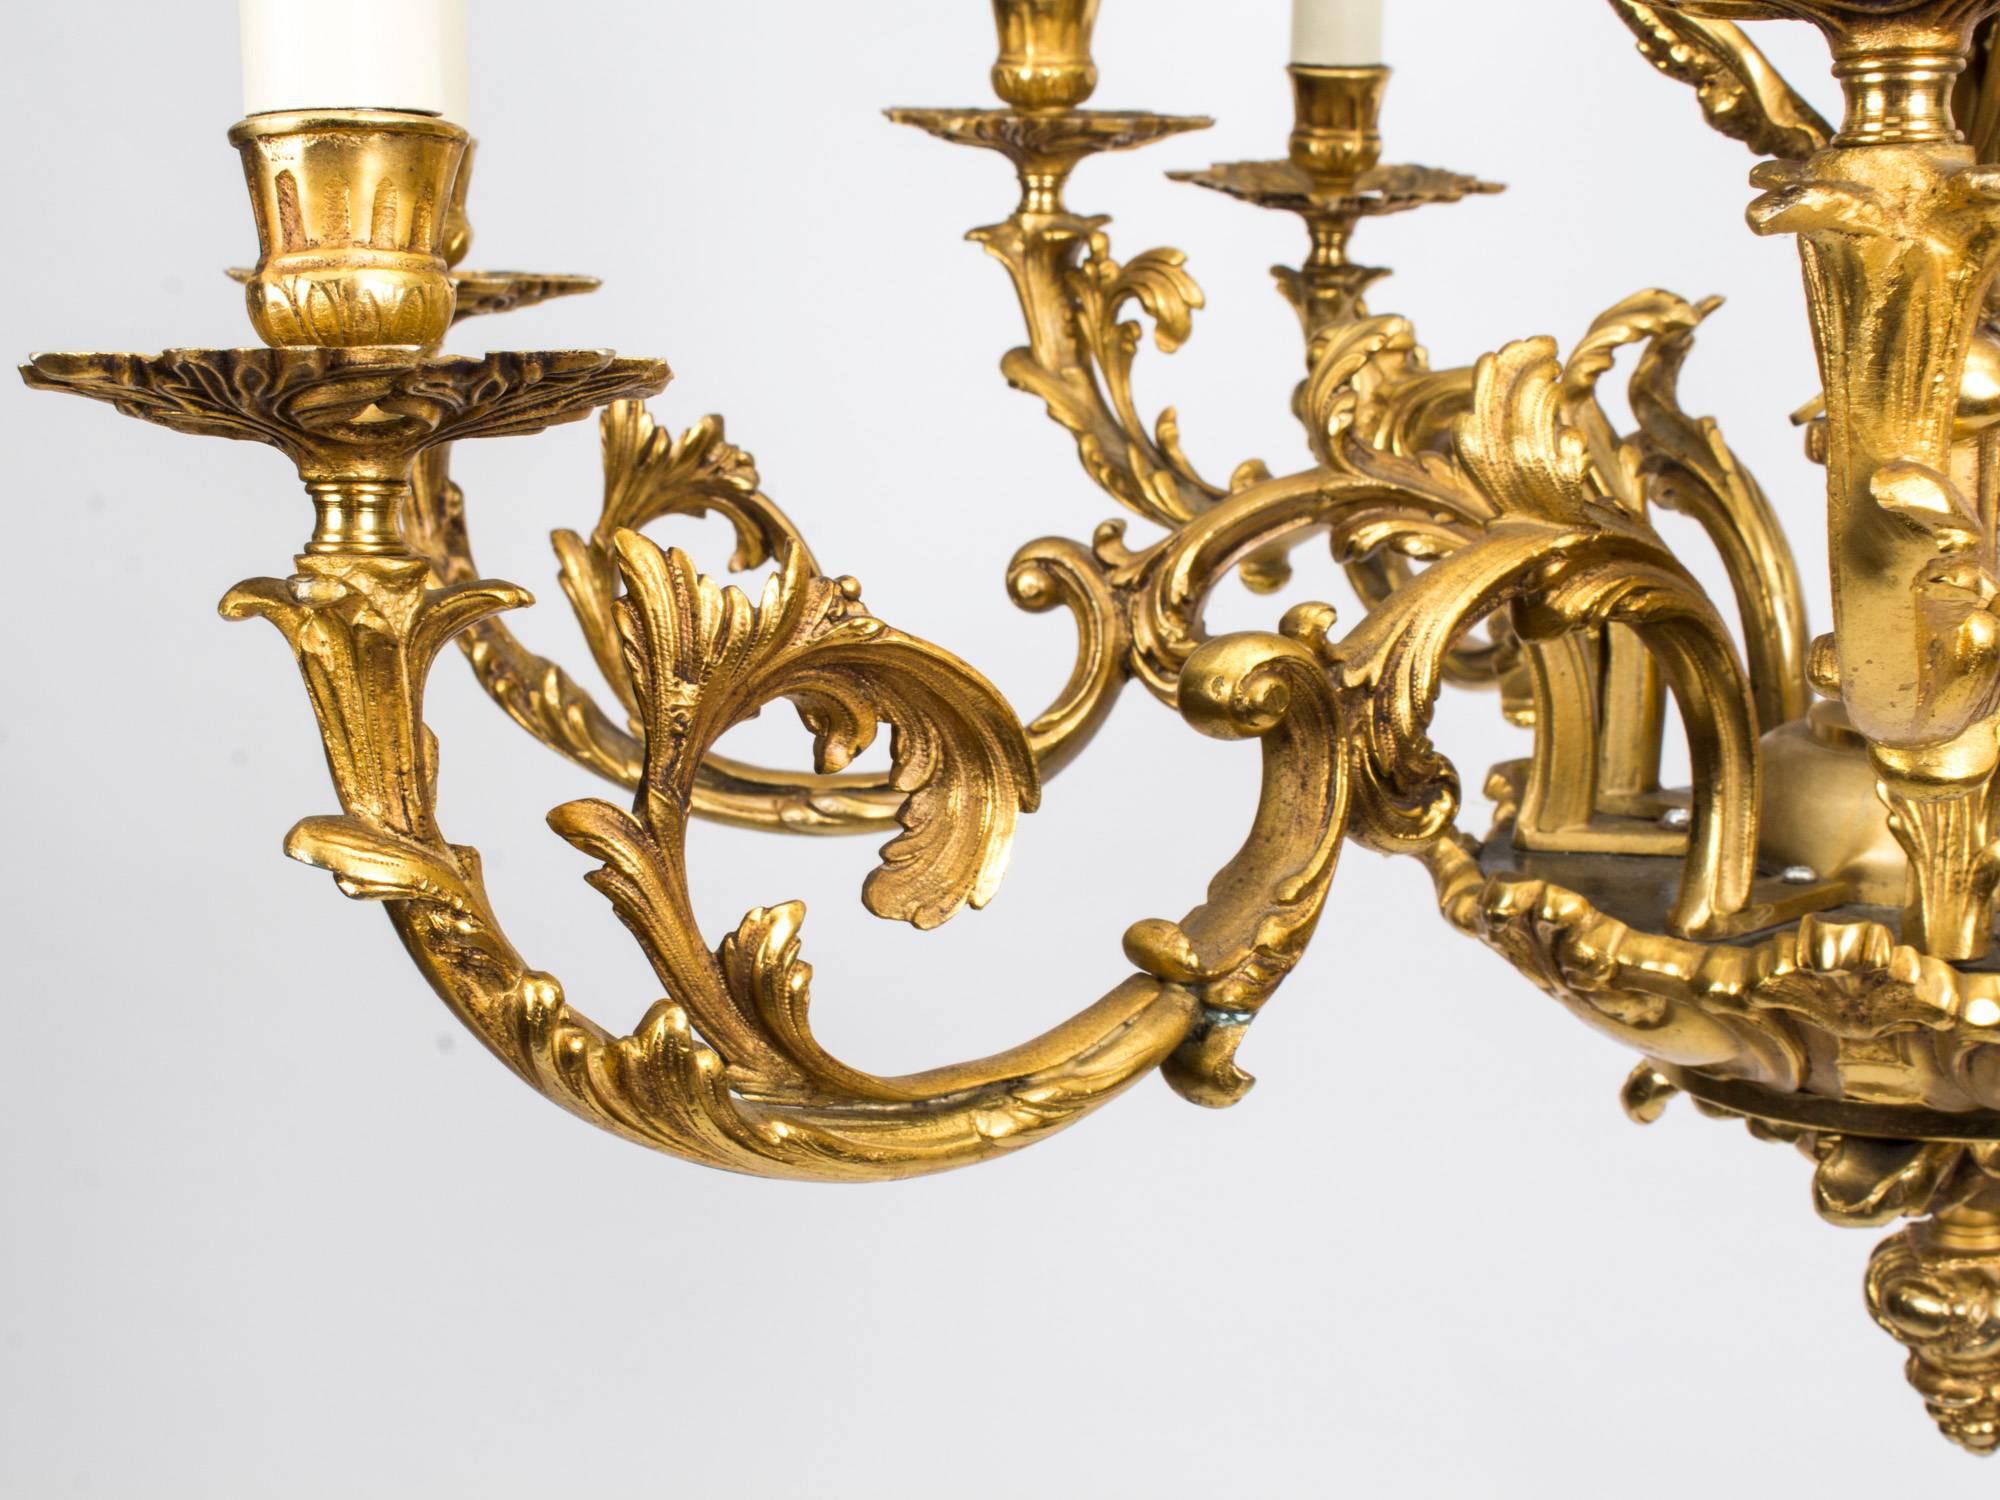 This is a highly decorative French mid-19th century Louis XIV style nine branch ormolu chandelier in the manner of Andre Charles Boulle, circa 1870 in date.

Emanating from a central column, the upper part is dressed with three female caryatids